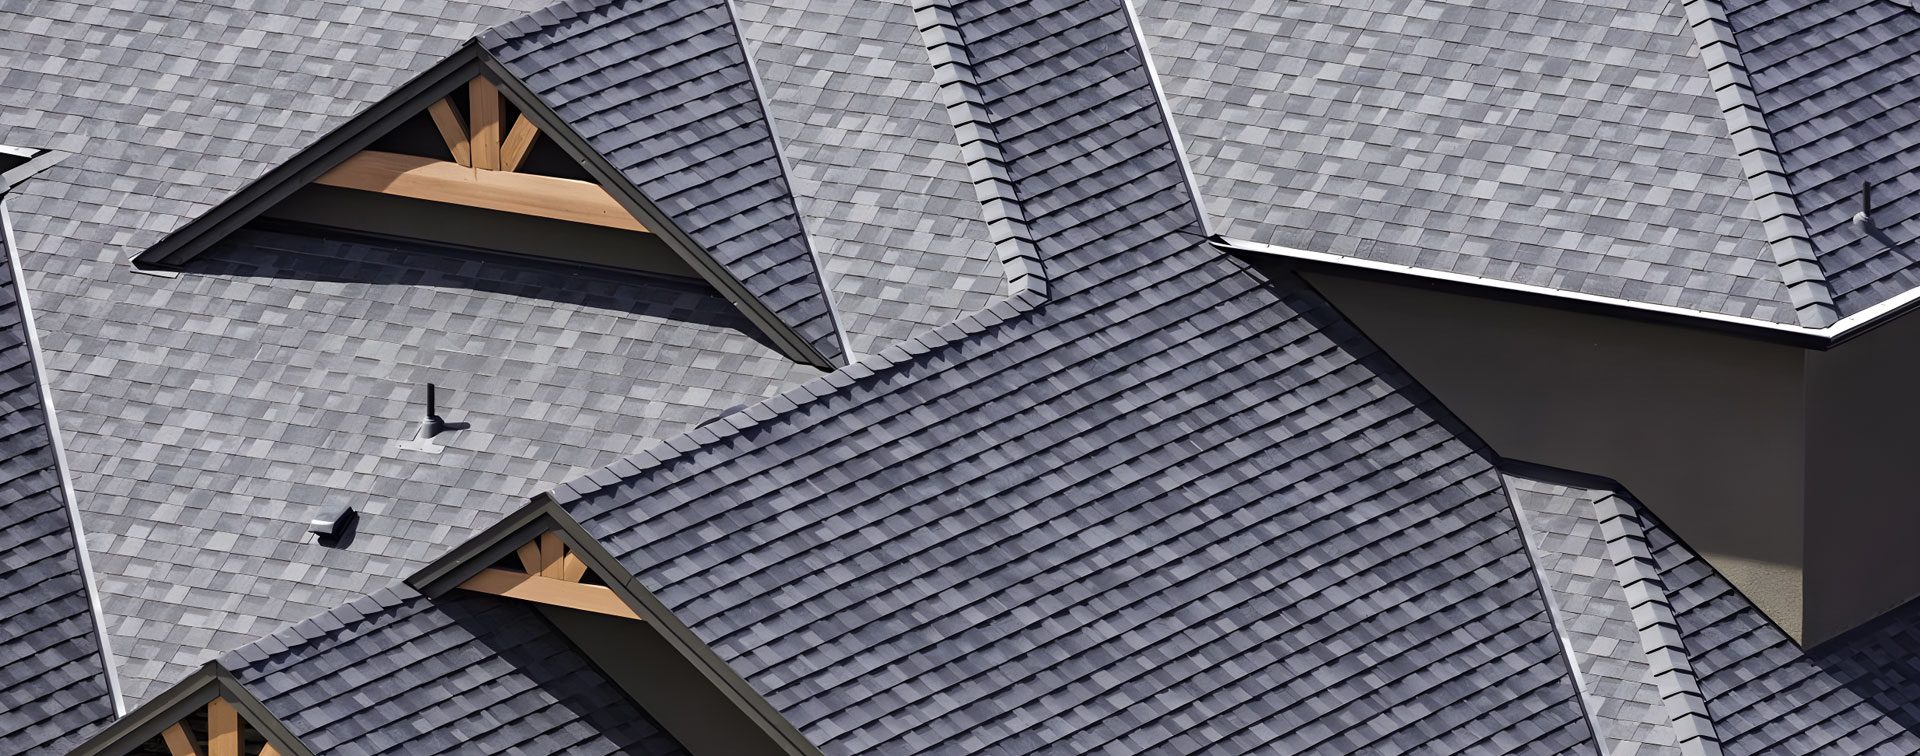 A close up of some shingles on the roof